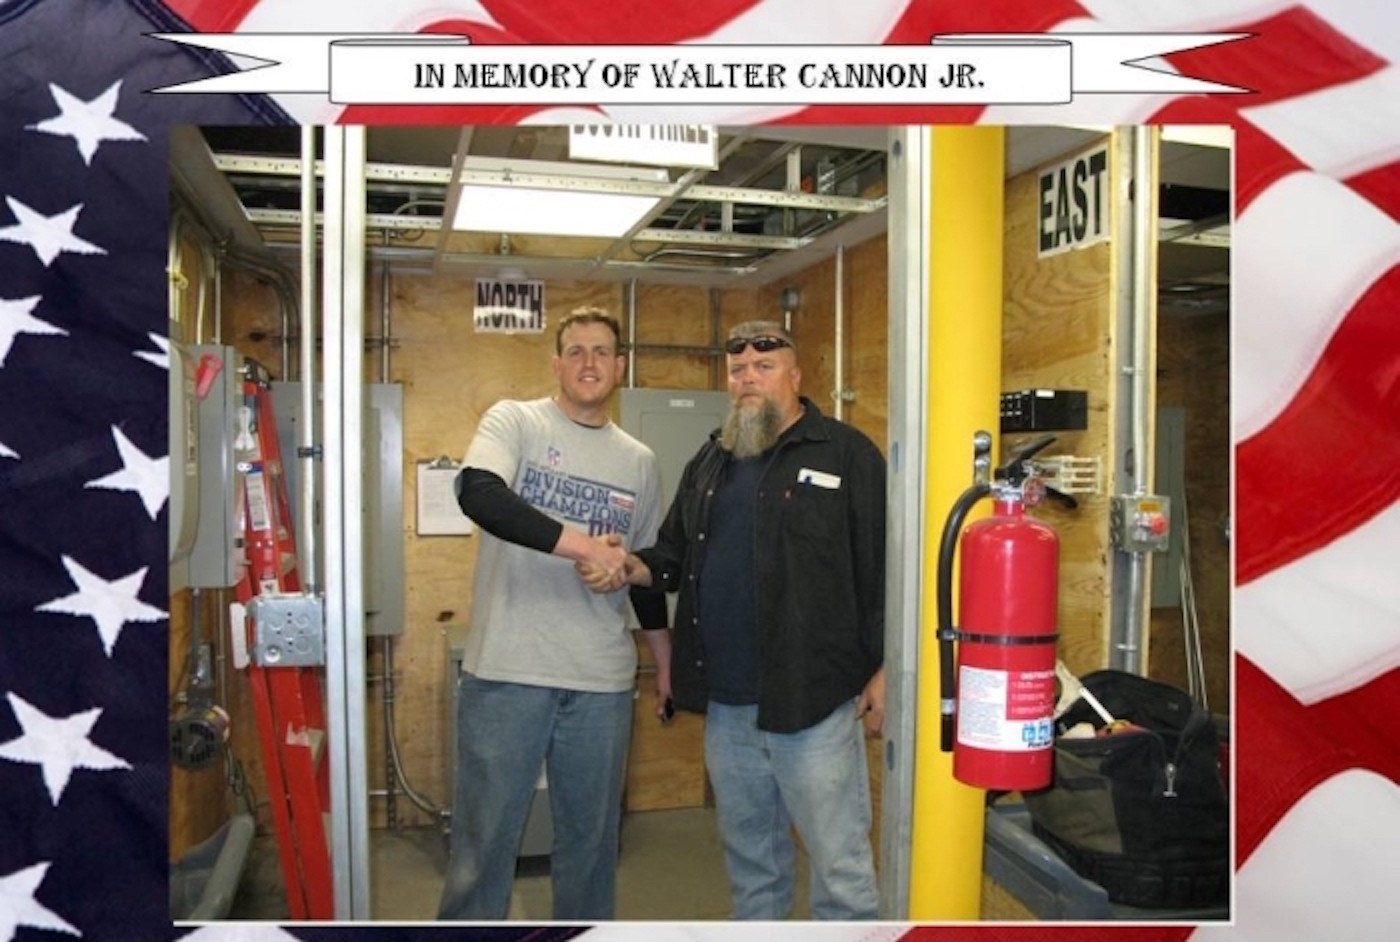 Pictured (right to left) is Boot Camp Mentor Walter Cannon Jr. and MIJ Eugene O'Sullivan. Booth #3 is dedicated to the life of Brother Walter Cannon jr. where his name and picture will remain forever. We will never forget.